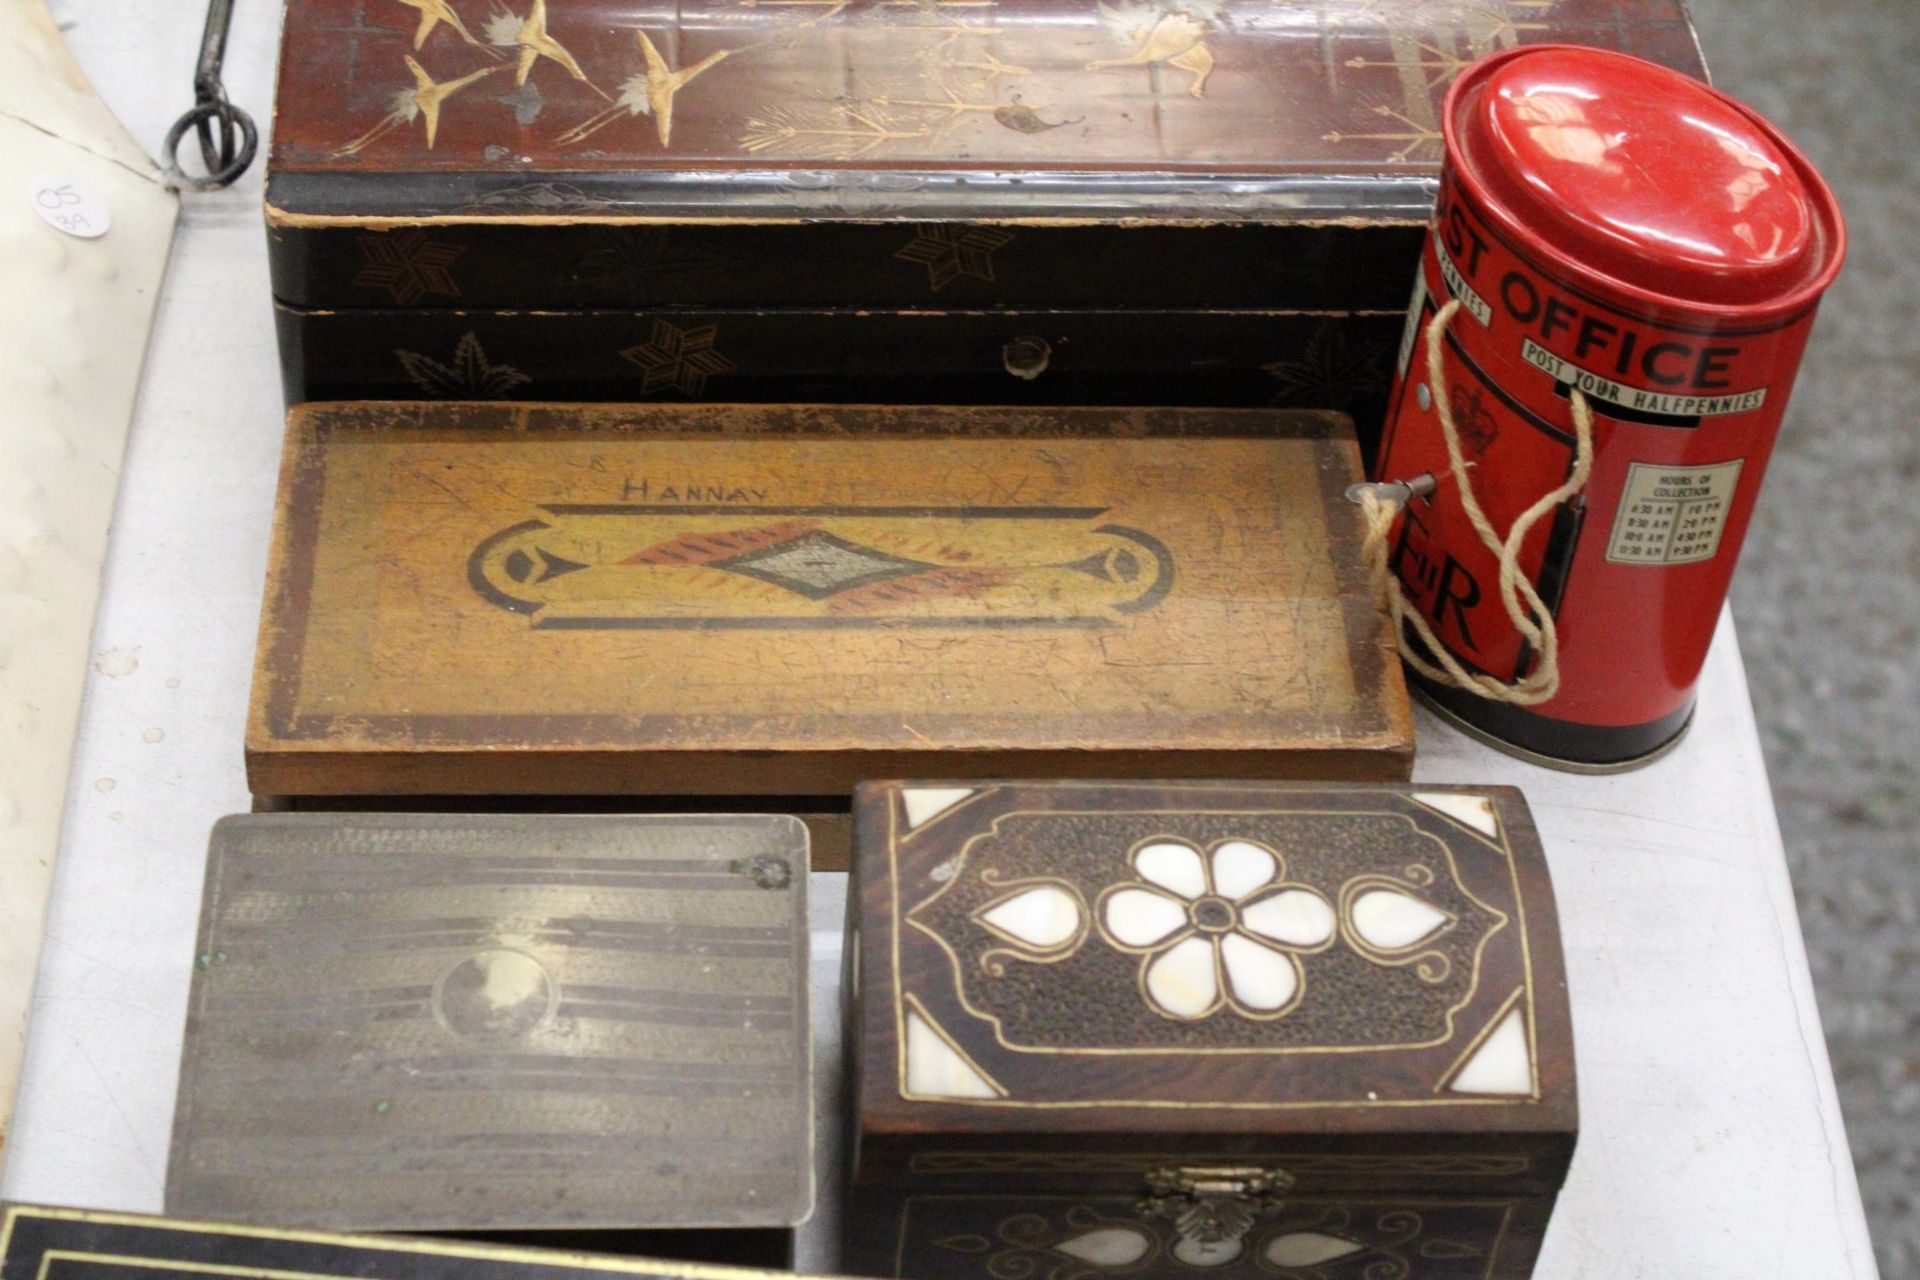 NINE VINTAGE TINS AND BOXES TO INCLUDE A POST BOX MONEY BOX, CASH TIN, PENCIL BOX, GLOVE BOX, ETC - Image 3 of 6